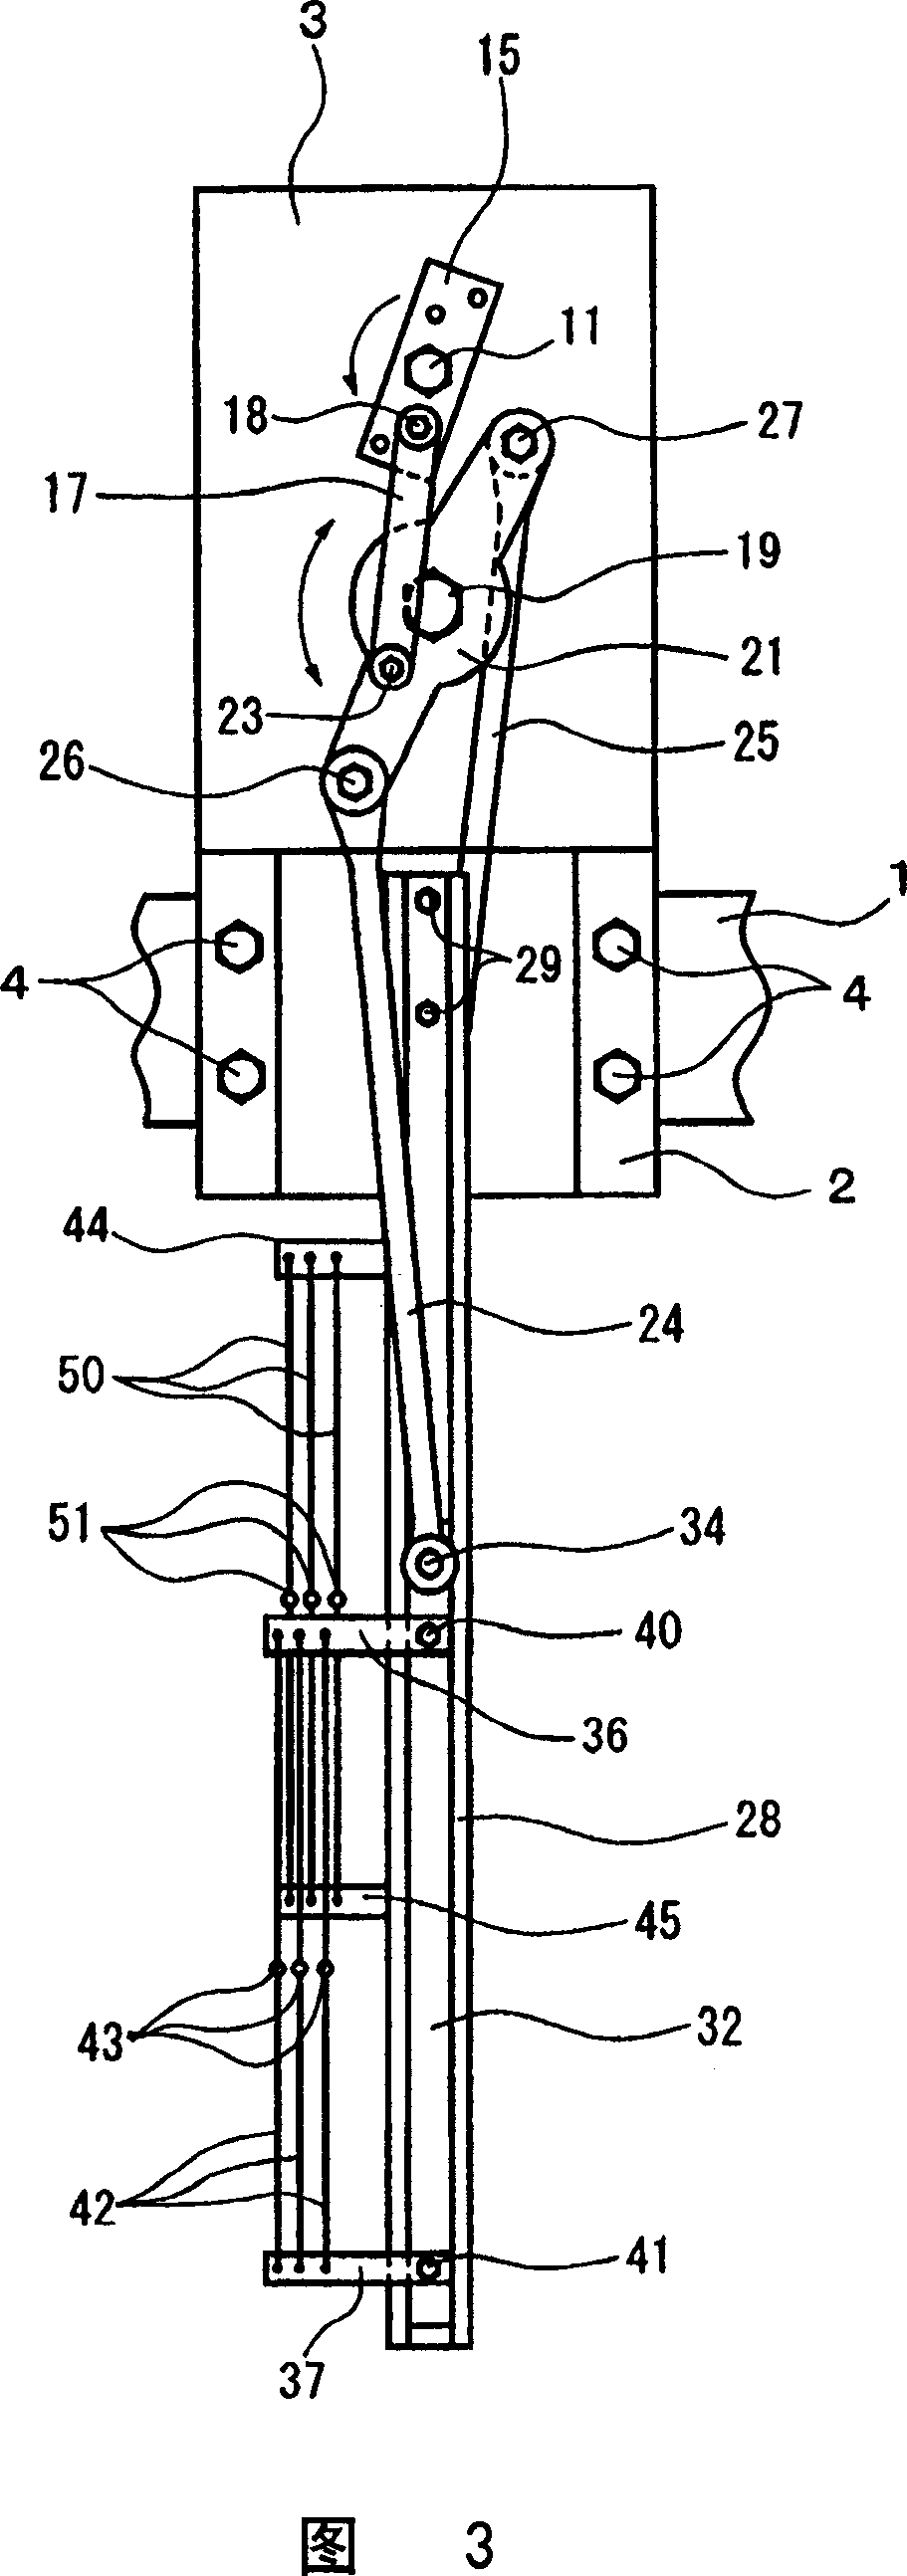 Device using for opening selvedge line of loom